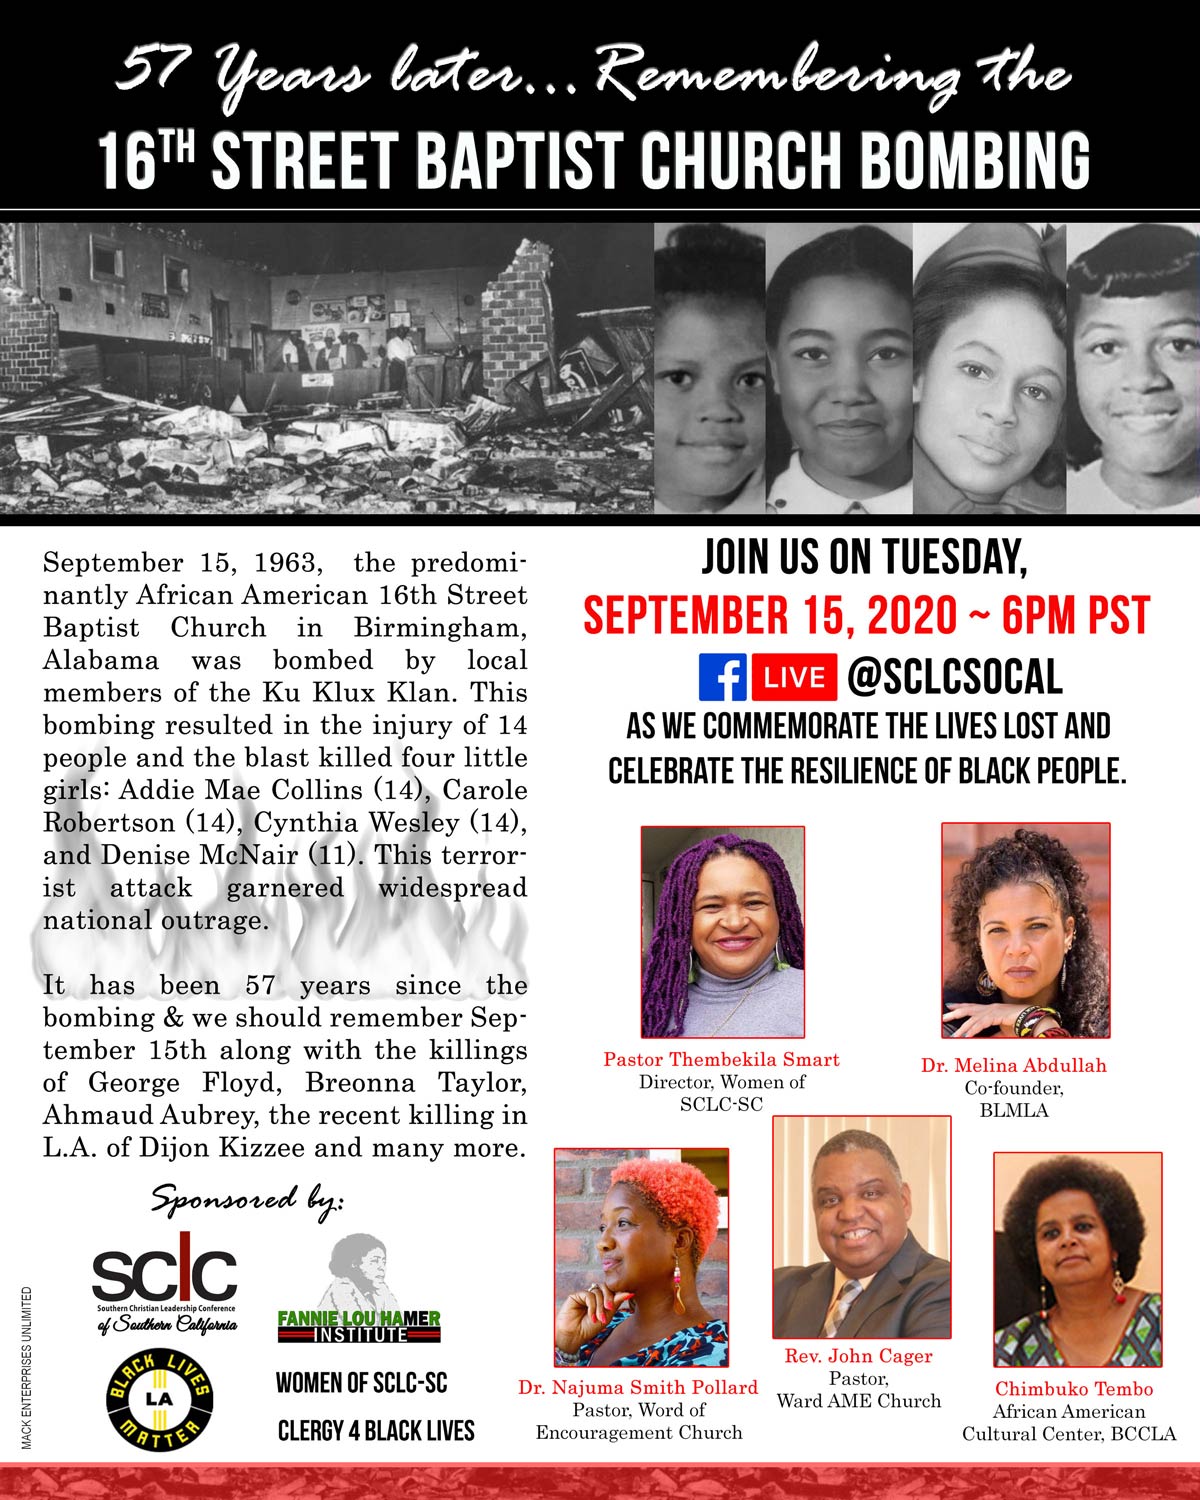 57 years later, Remembering the 16th Street Baptist Church Bombing